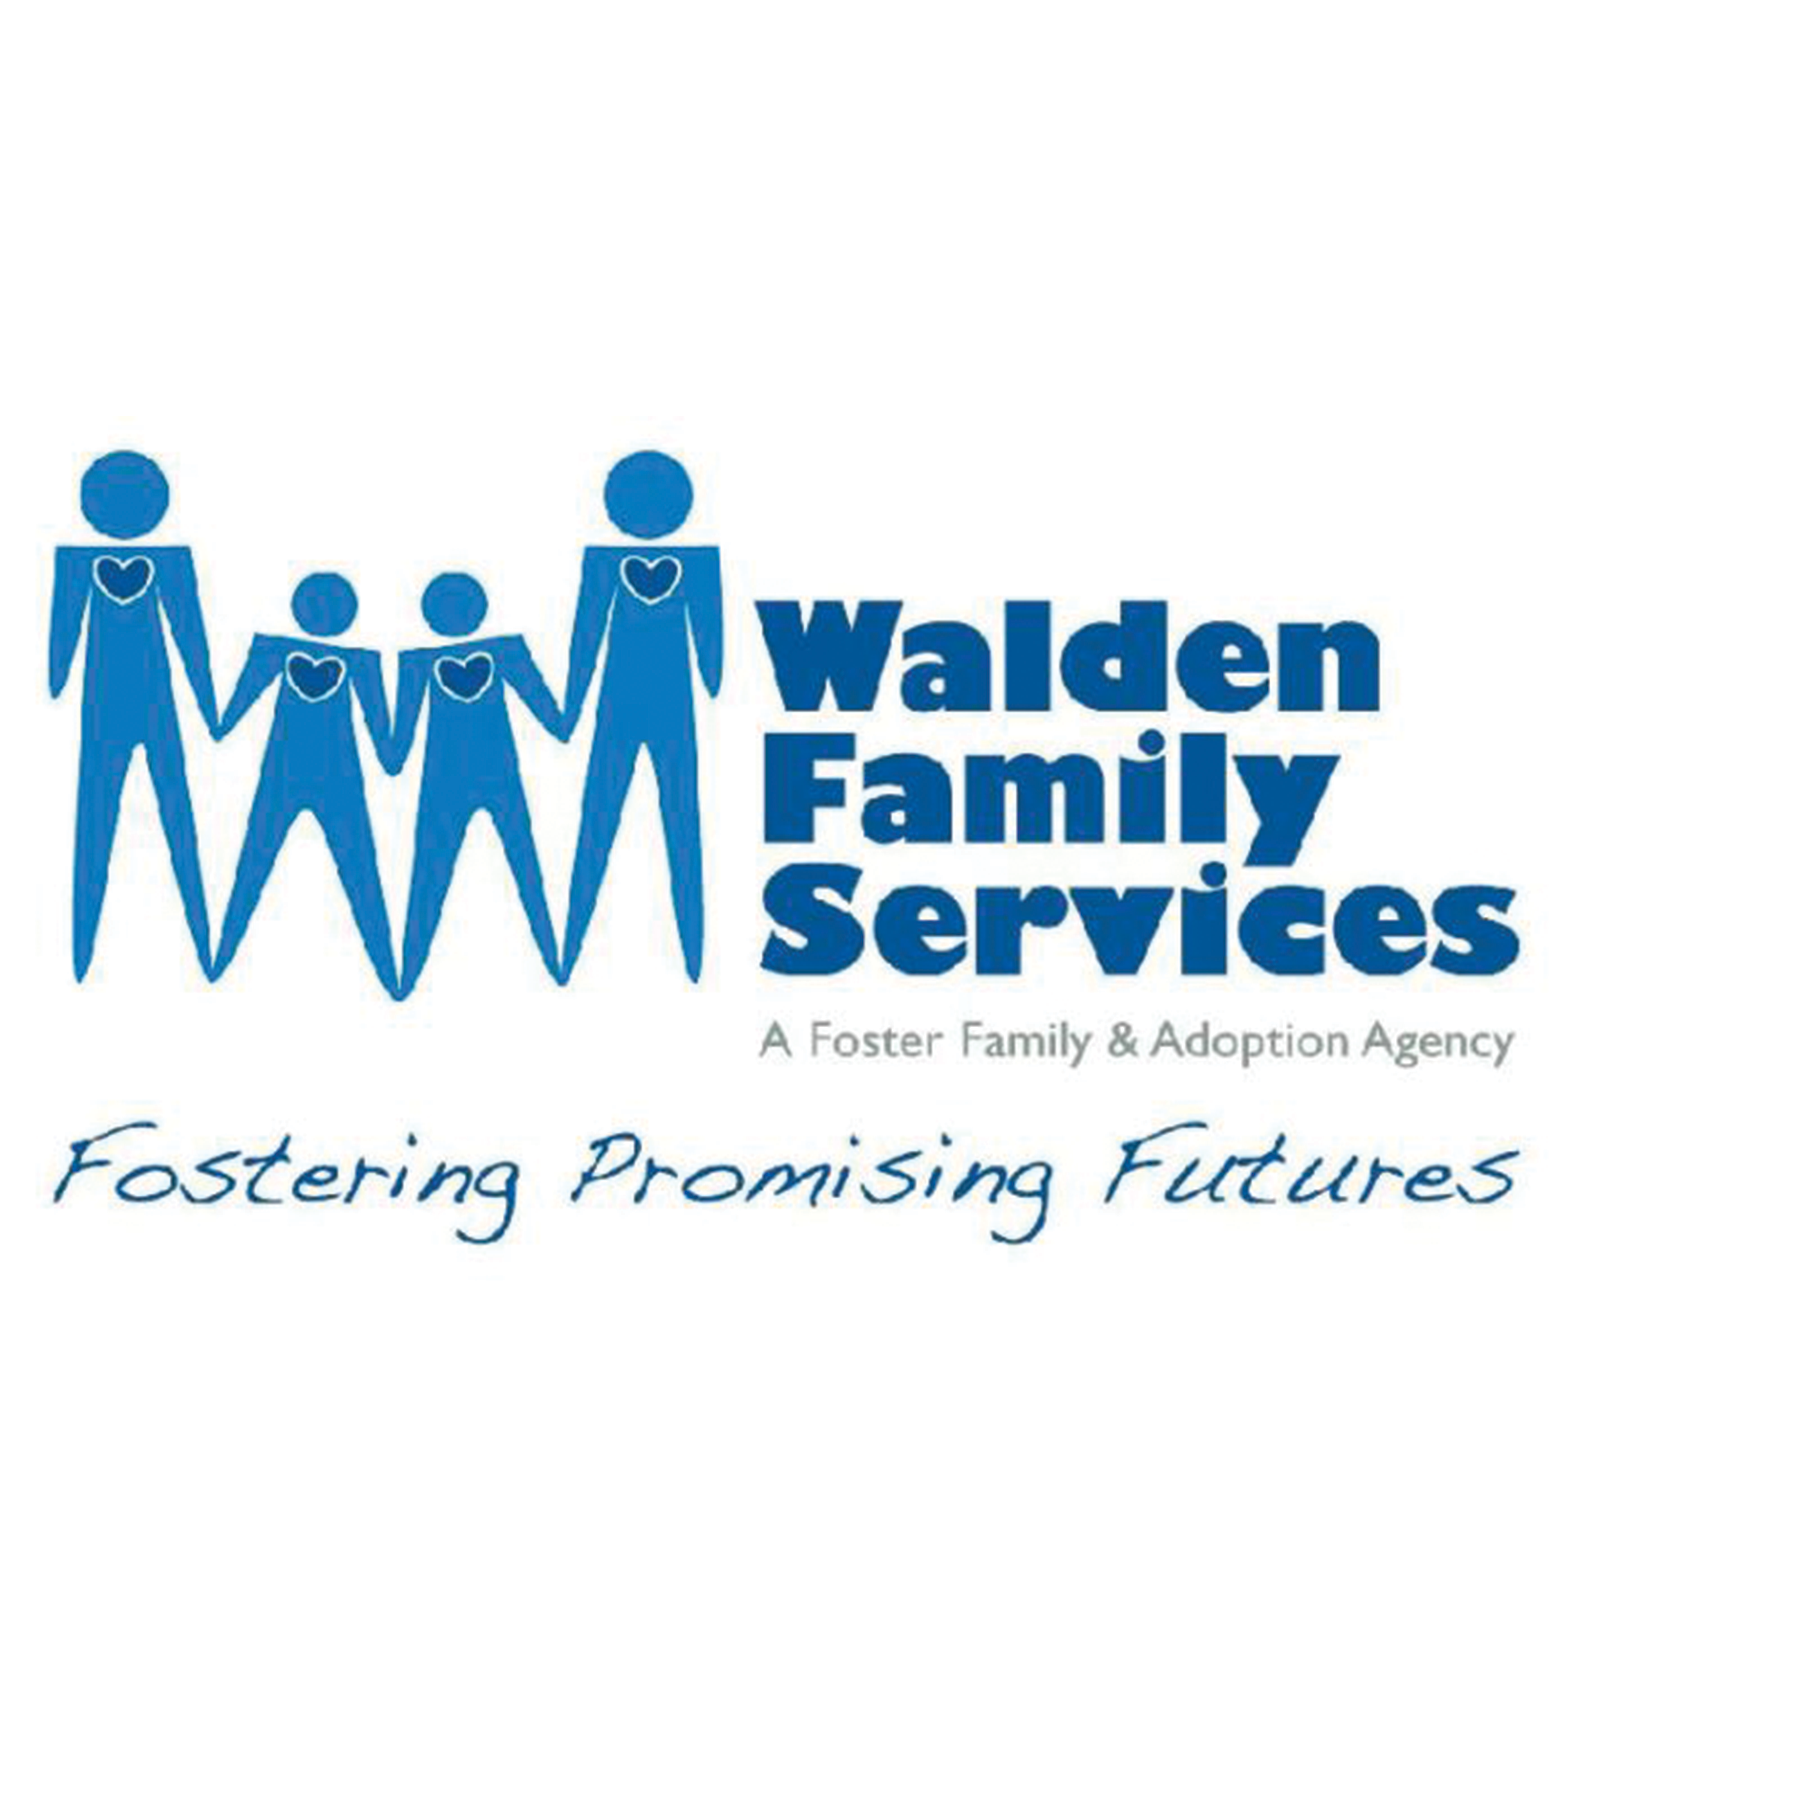 Walden Family Services Fostering Promising Futures